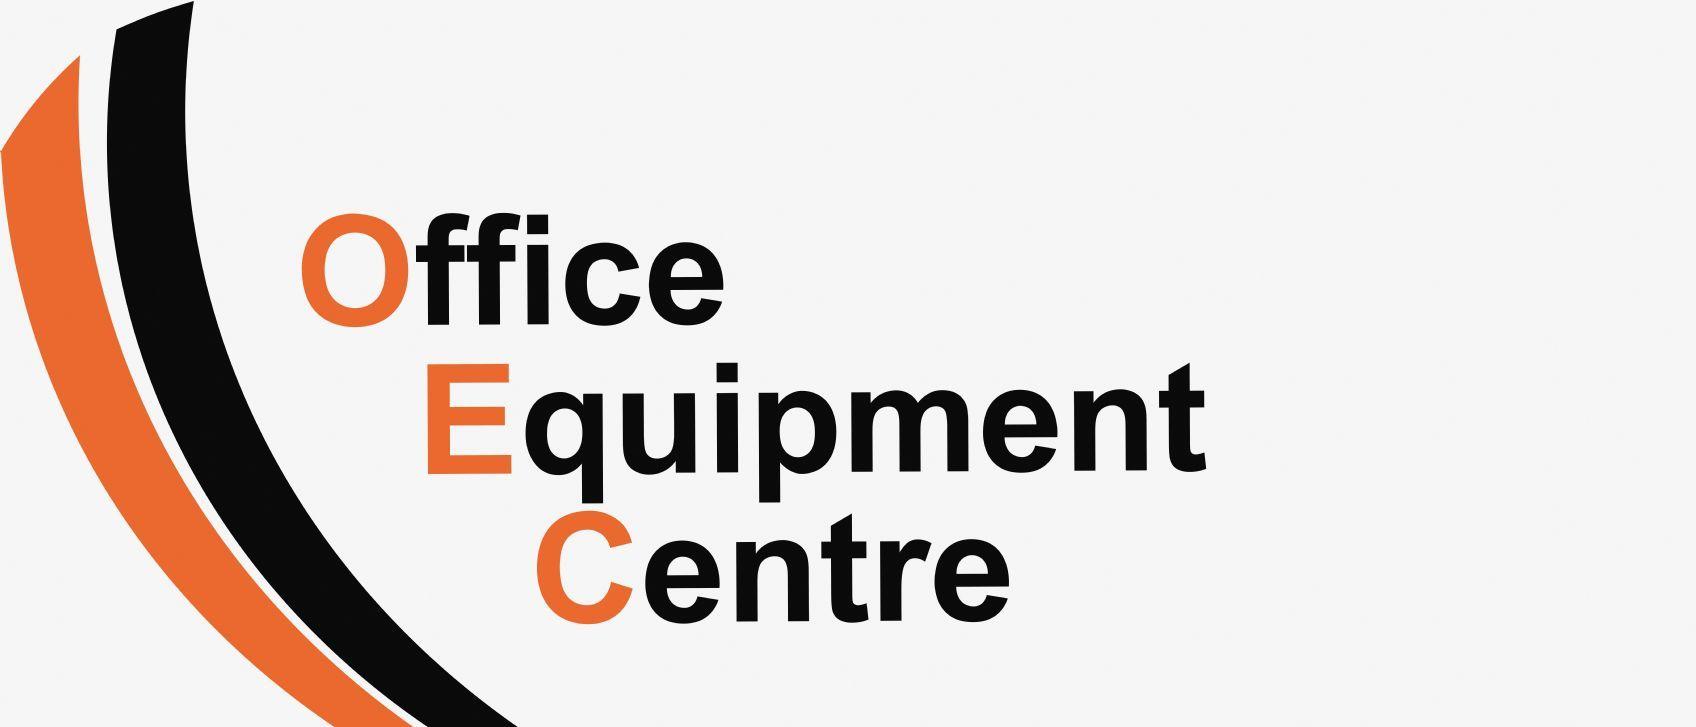 Office-Supplies Logo - Office Supplies, Stationery & Printing - Office Equipment Centre